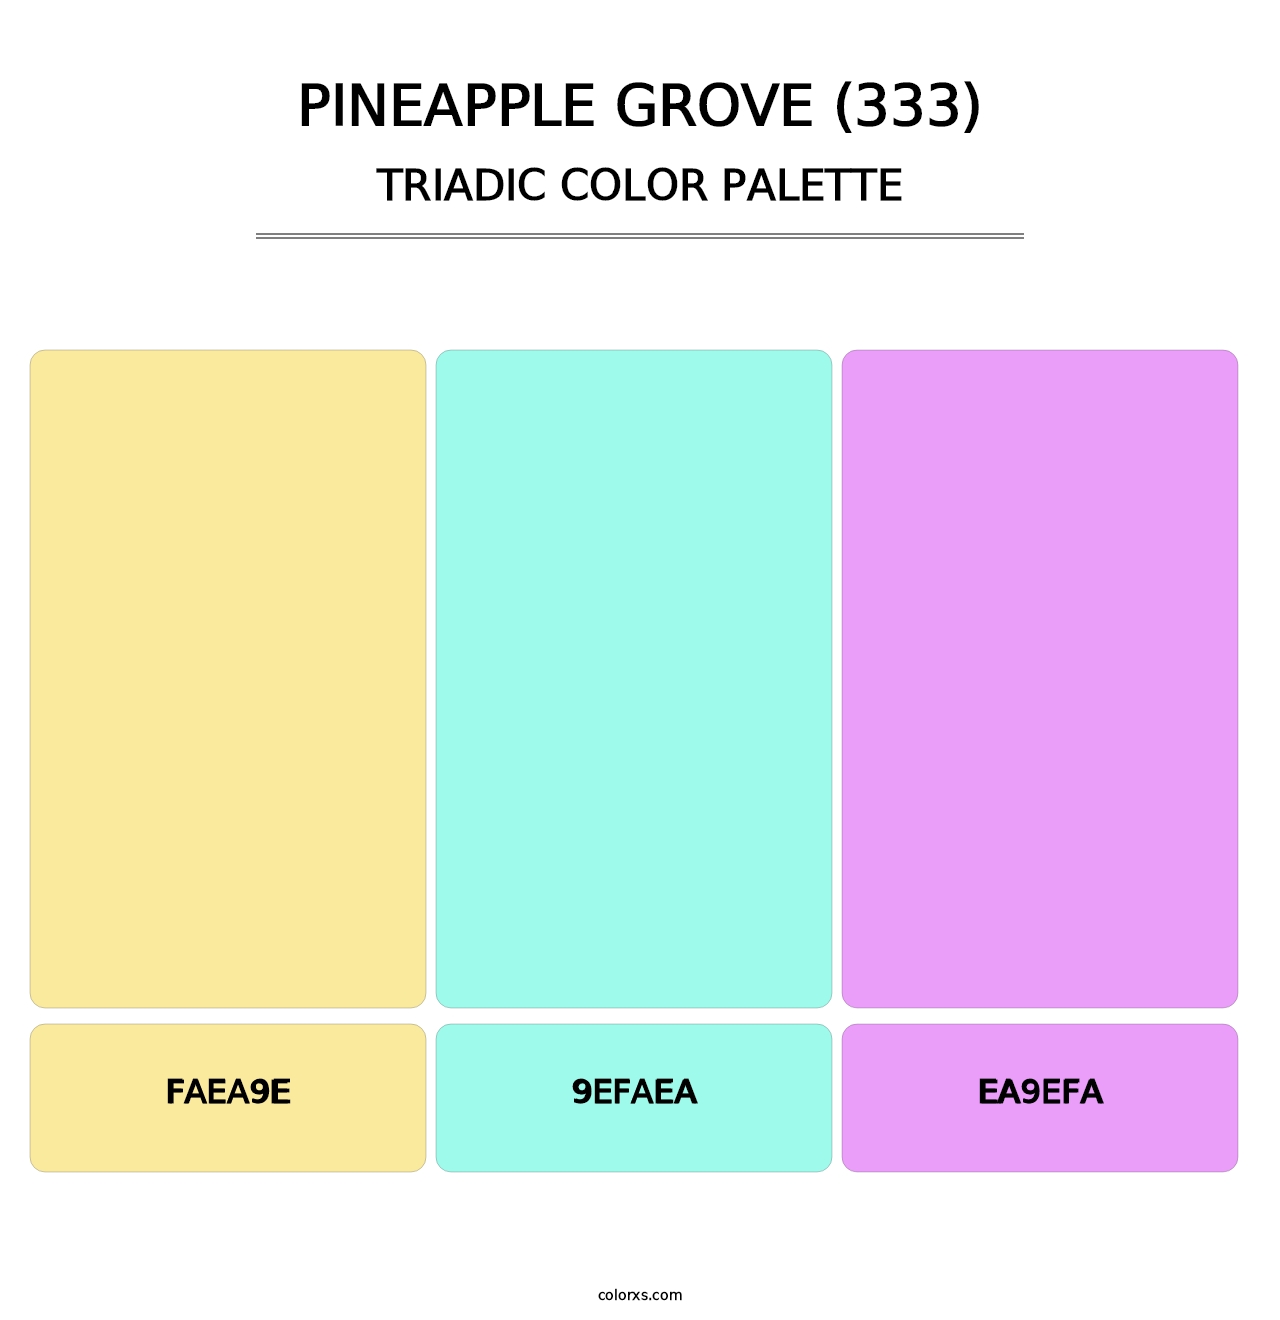 Pineapple Grove (333) - Triadic Color Palette